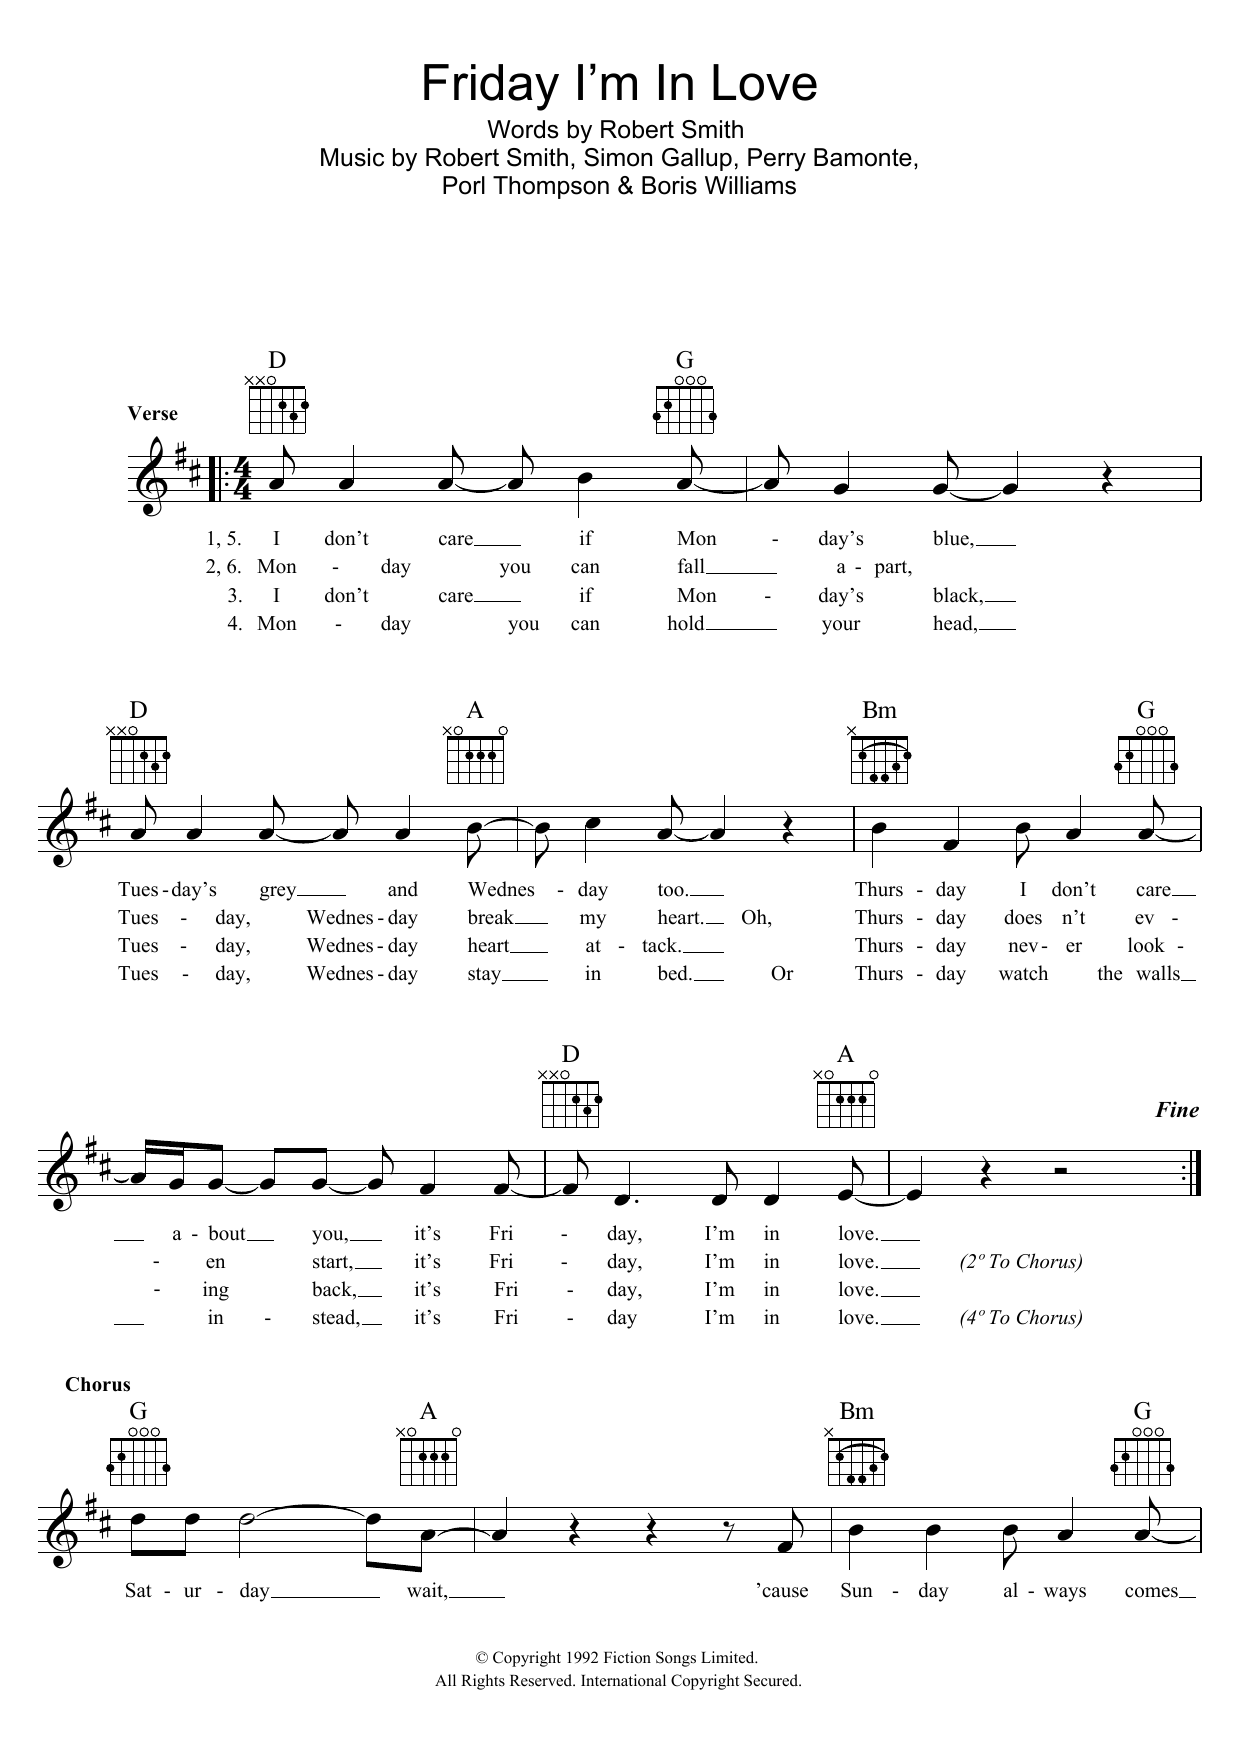 Download The Cure Friday I'm In Love Sheet Music